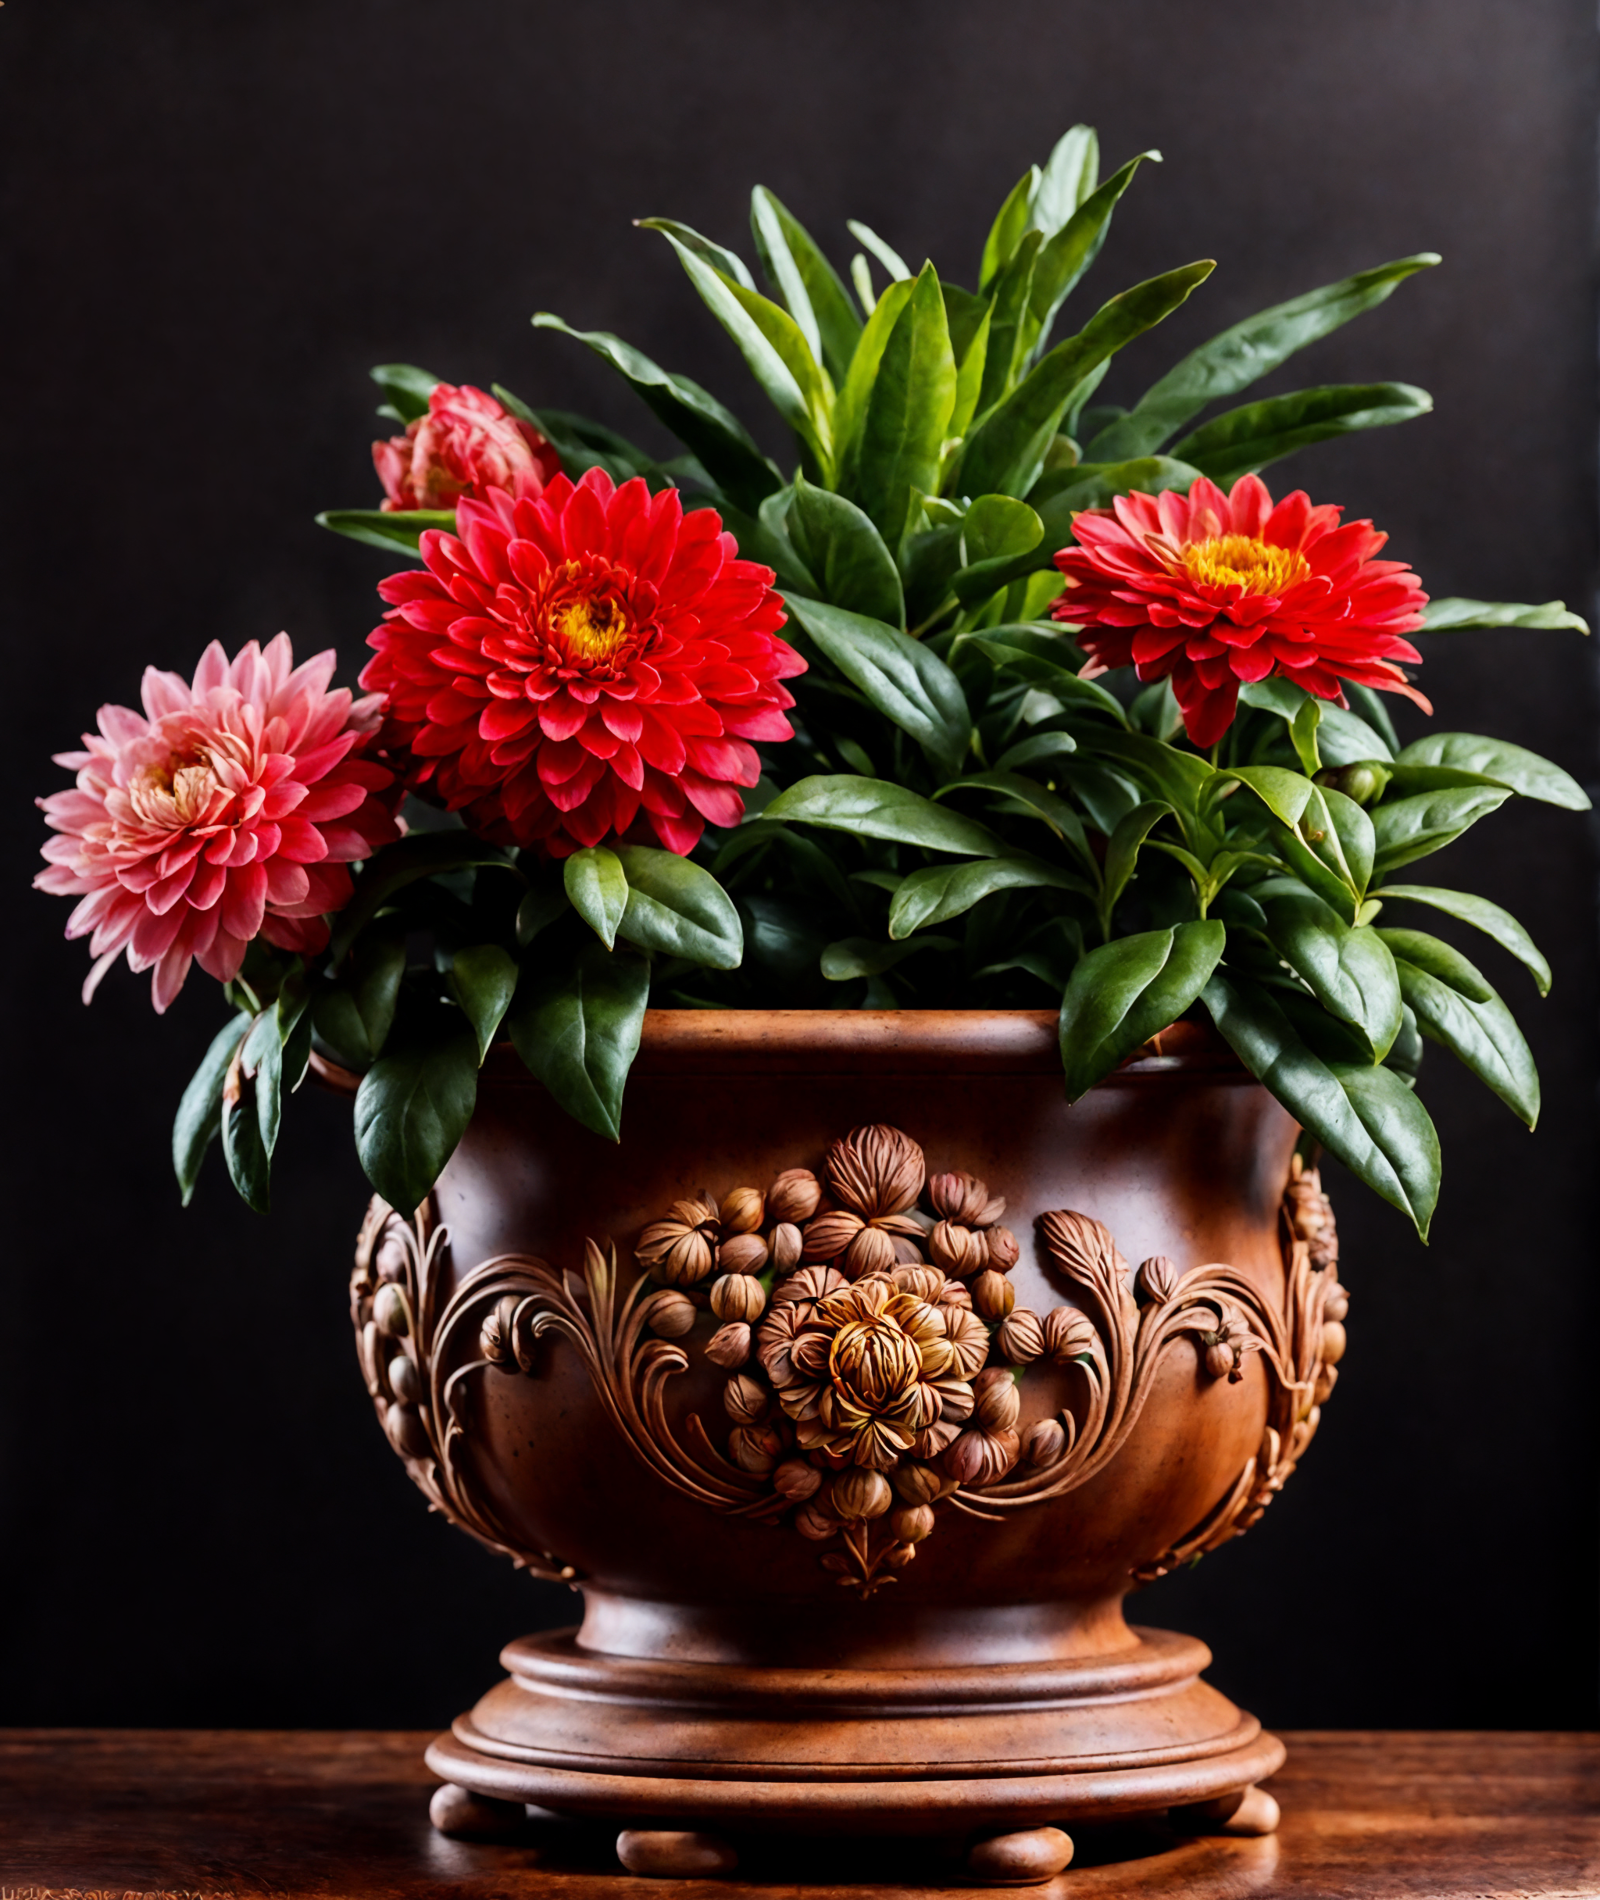 Xerochrysum bracteatum with red blooms in a brown vase on a wooden table, clear lighting, dark backdrop.